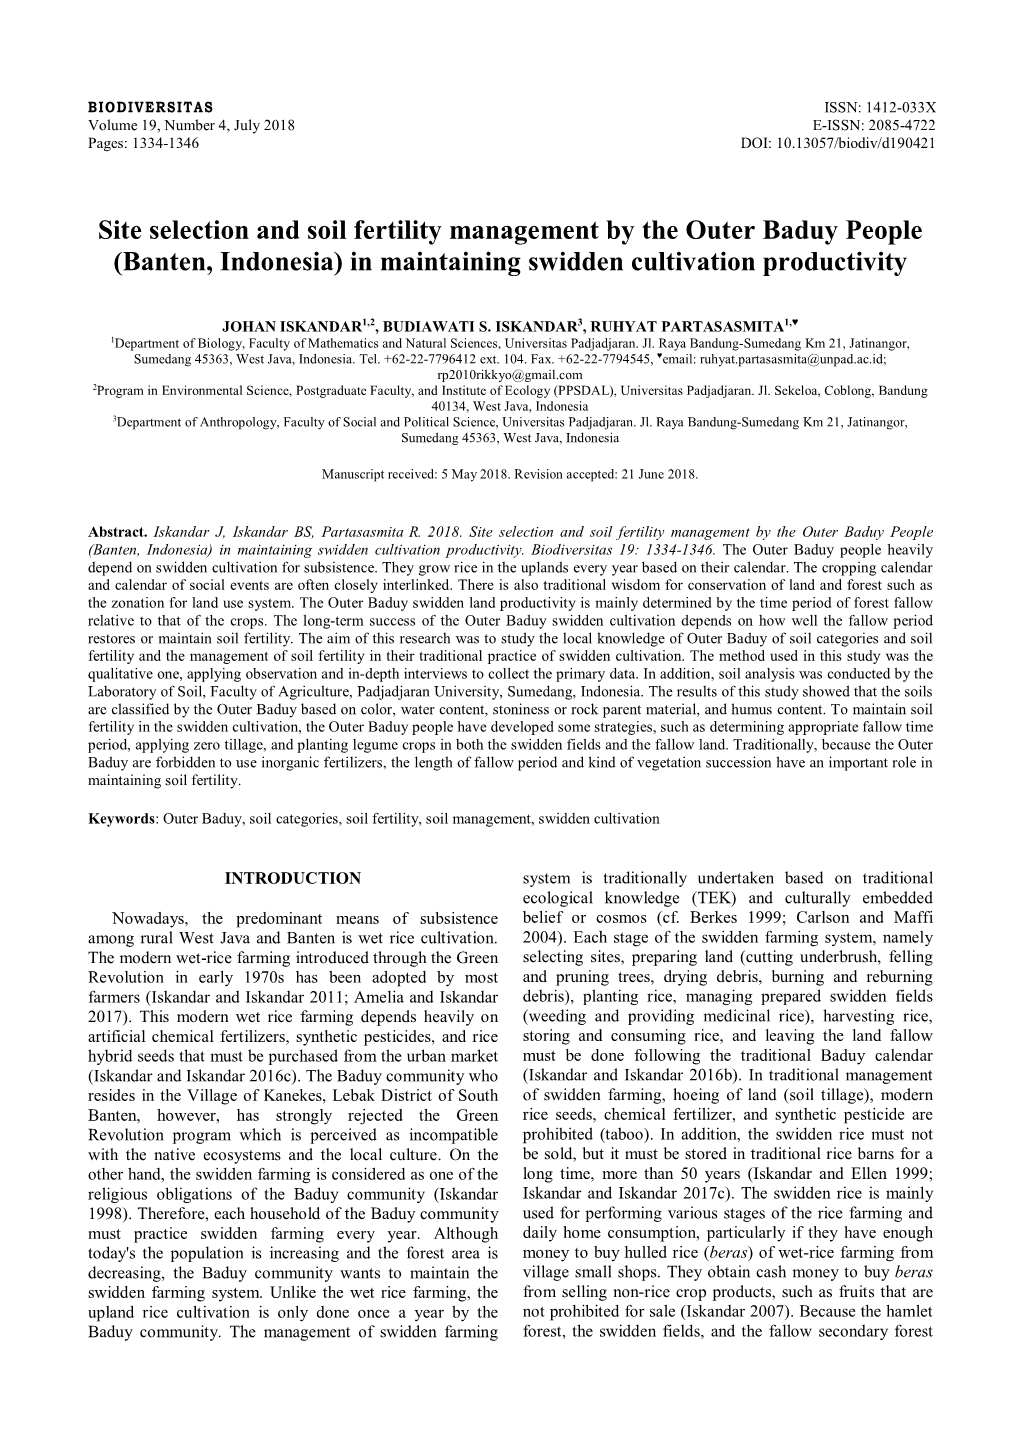 Site Selection and Soil Fertility Management by the Outer Baduy People (Banten, Indonesia) in Maintaining Swidden Cultivation Productivity